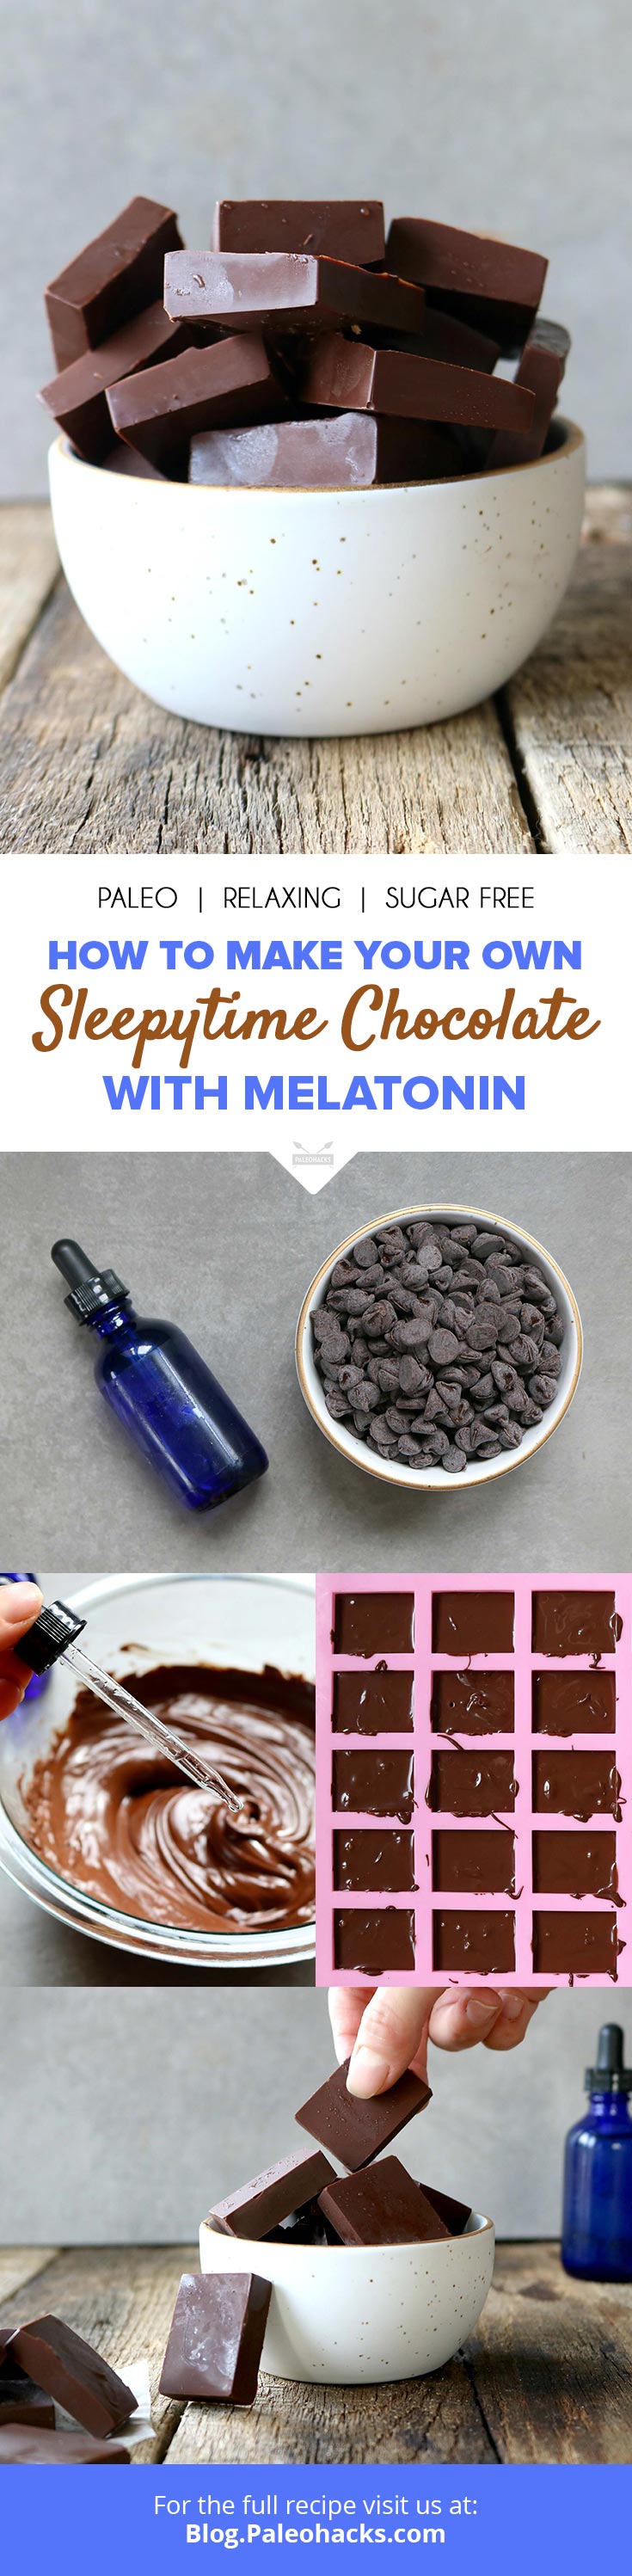 Combining the relaxing effects of melatonin along with antioxidant-rich dark chocolate creates just the right amount of calming benefits before bedtime.